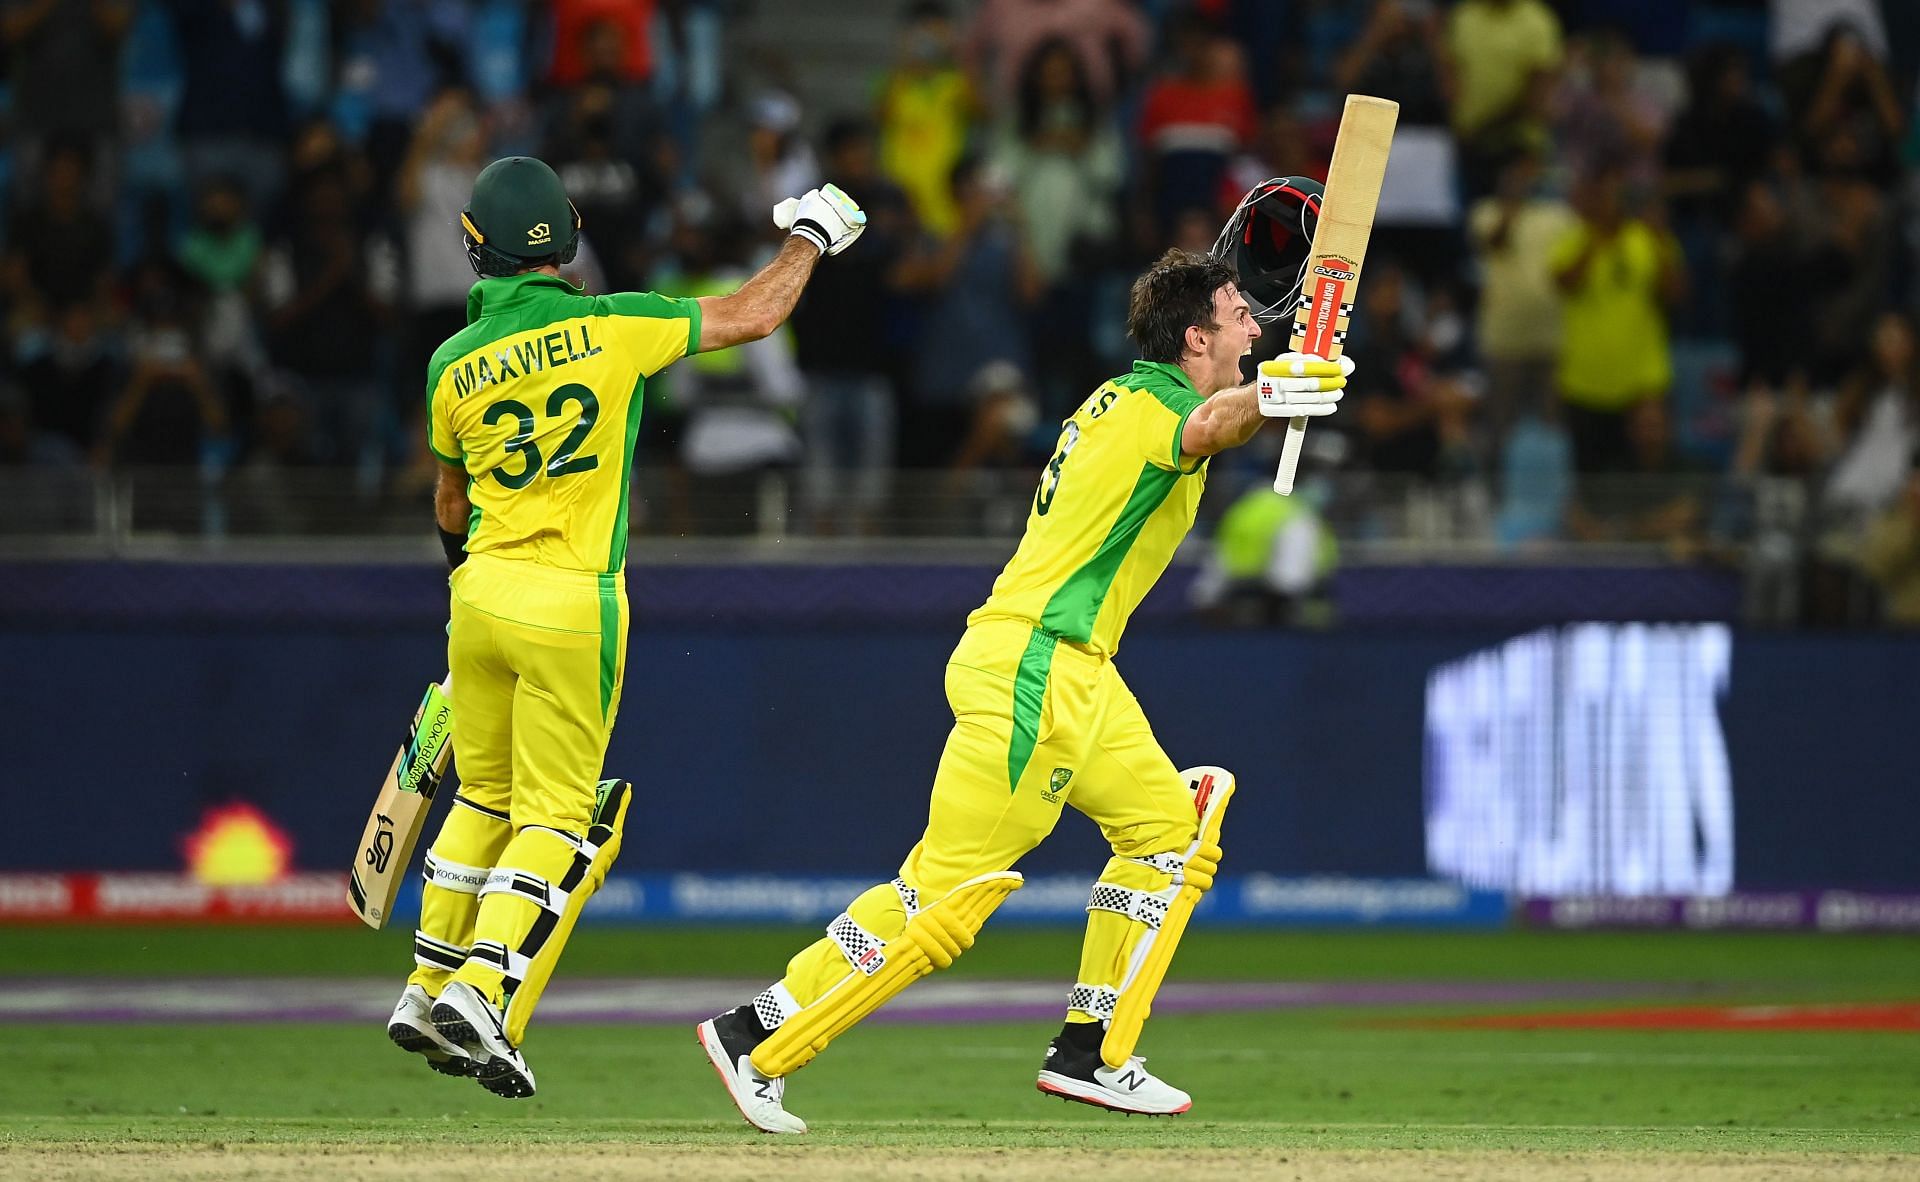 Delhi Capitals have acquired the services of Mitchell Marsh following his T20 World Cup heroics (Getty Images)